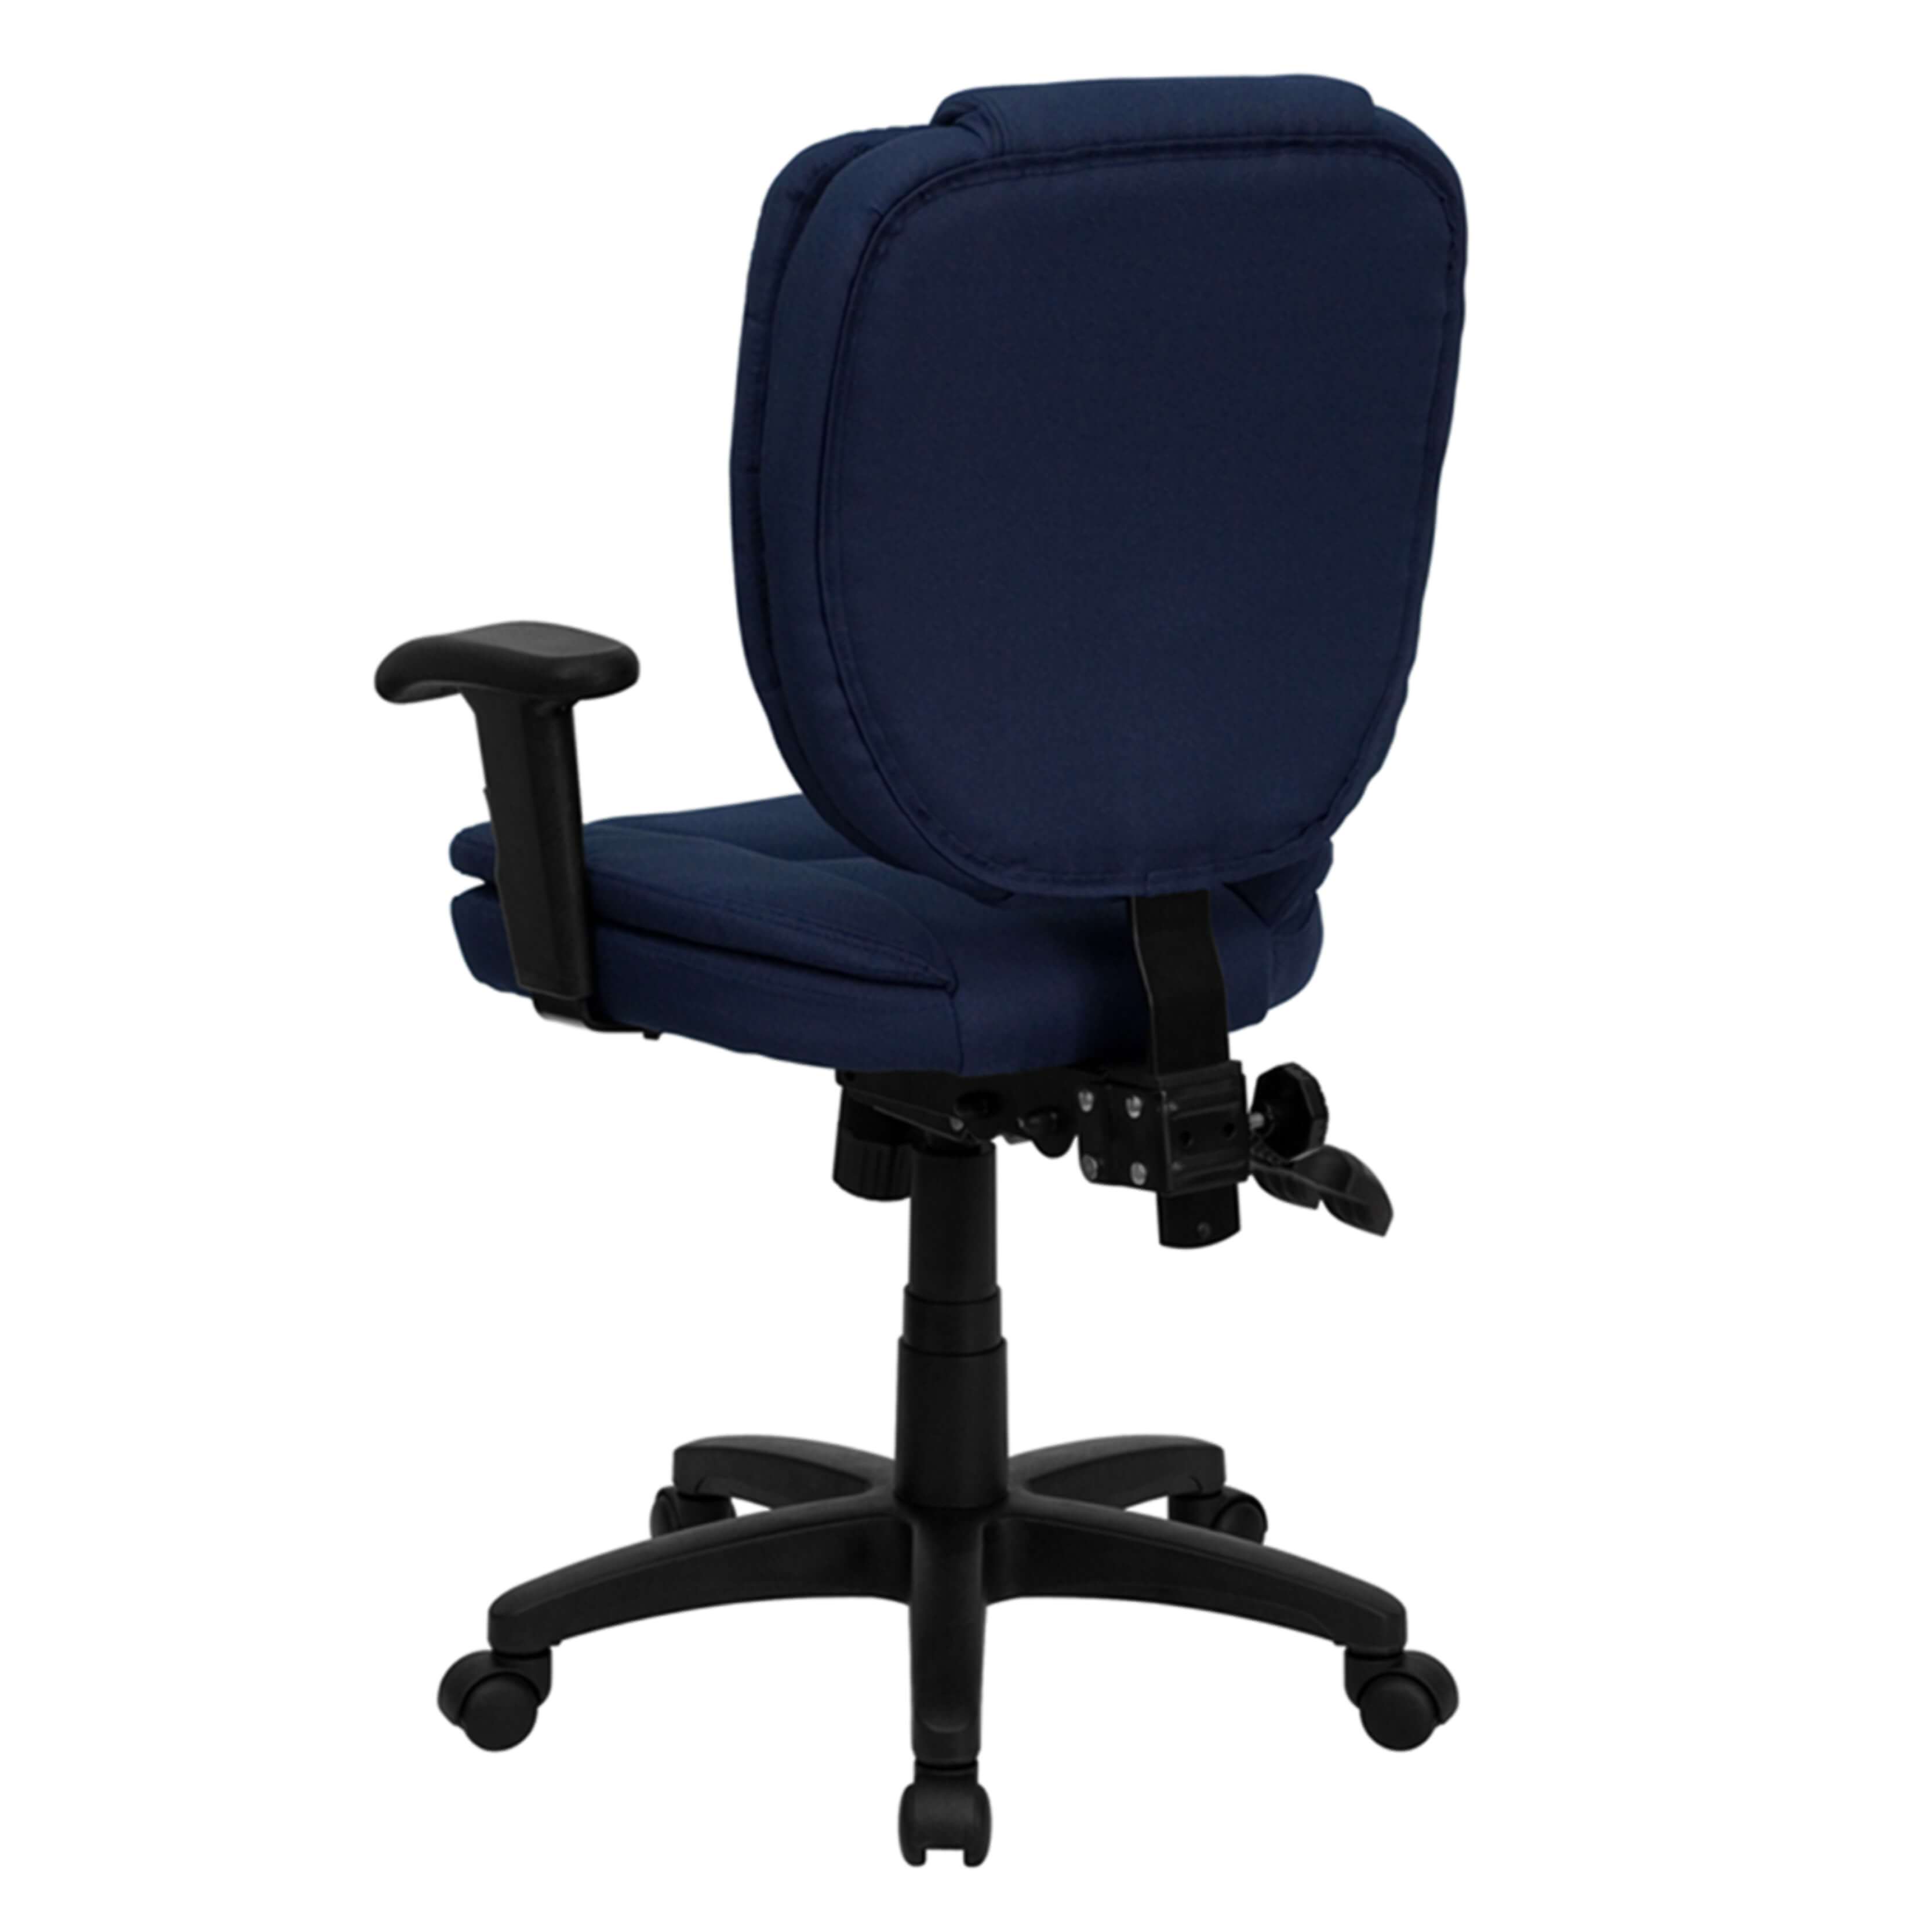 Traditional office chair rear view